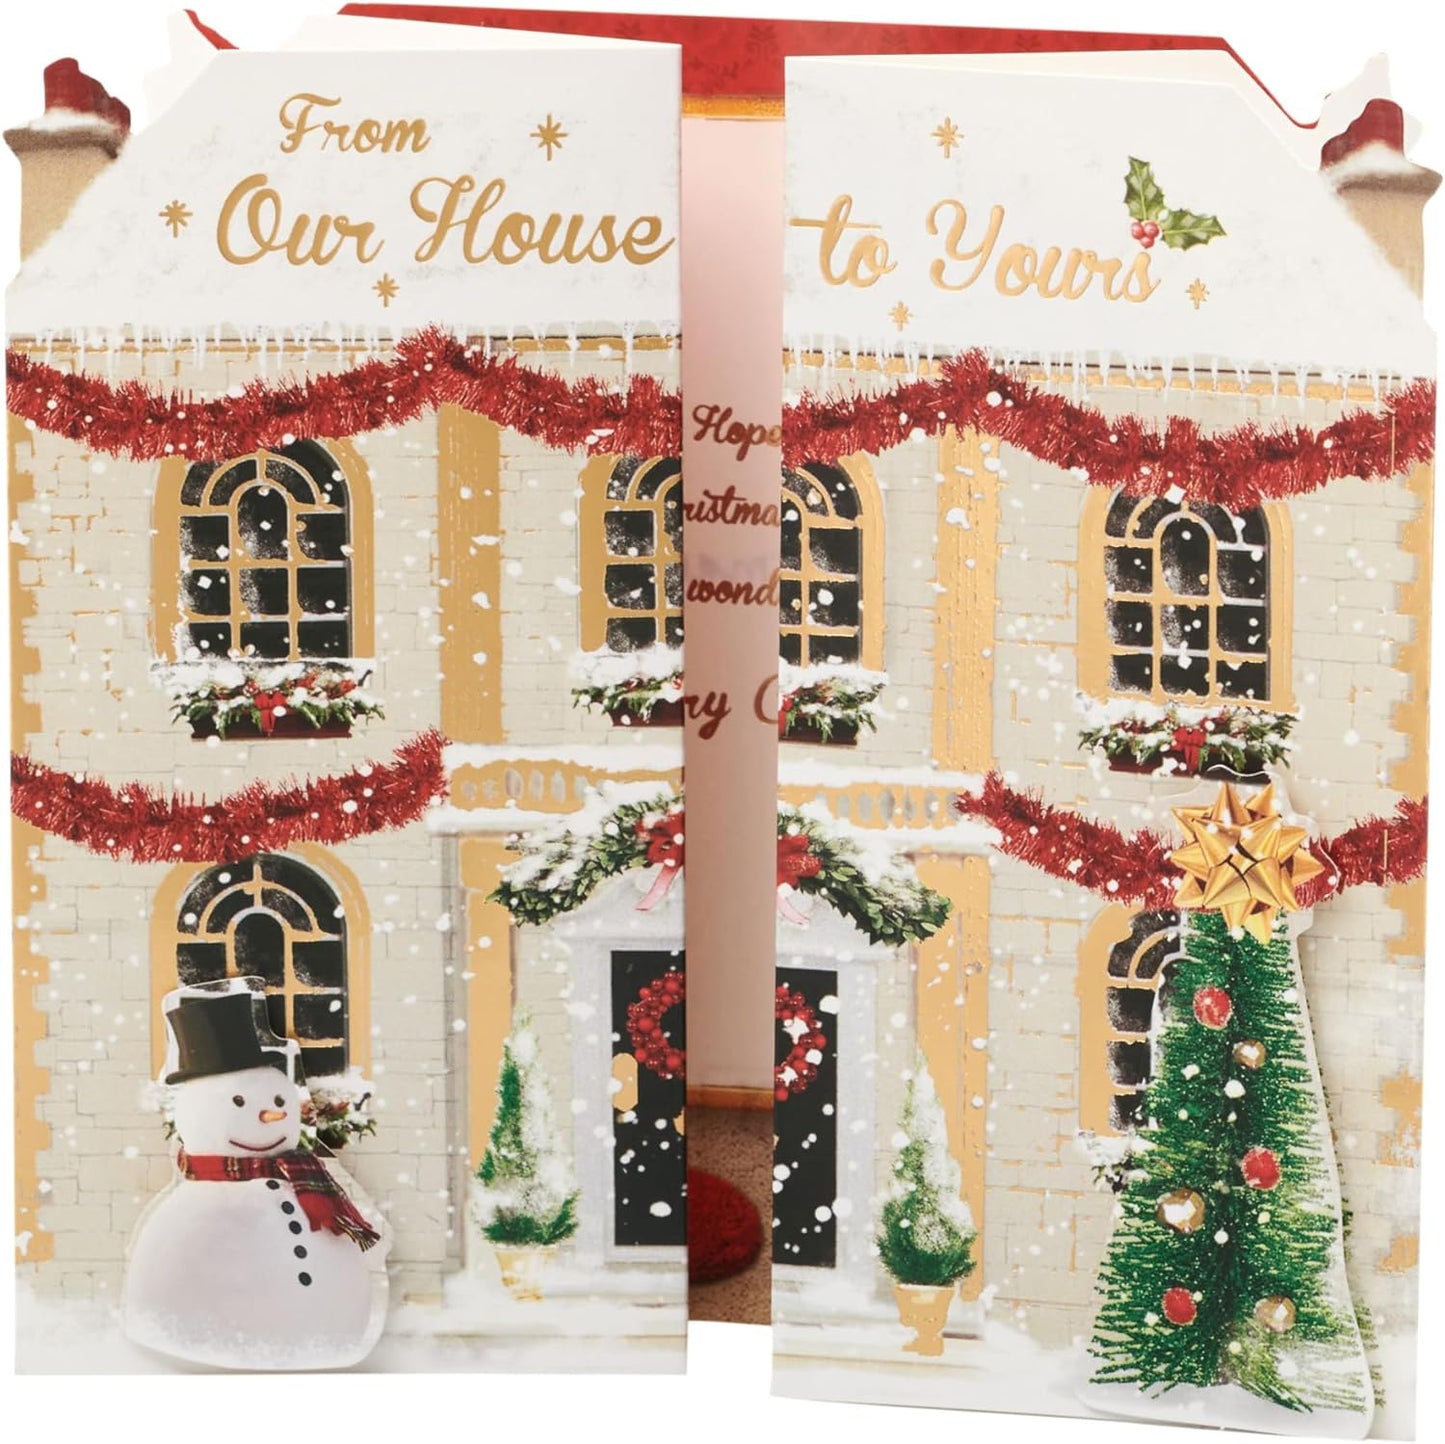 From Our House to Yours Christmas Card Festive House Shaped Design 